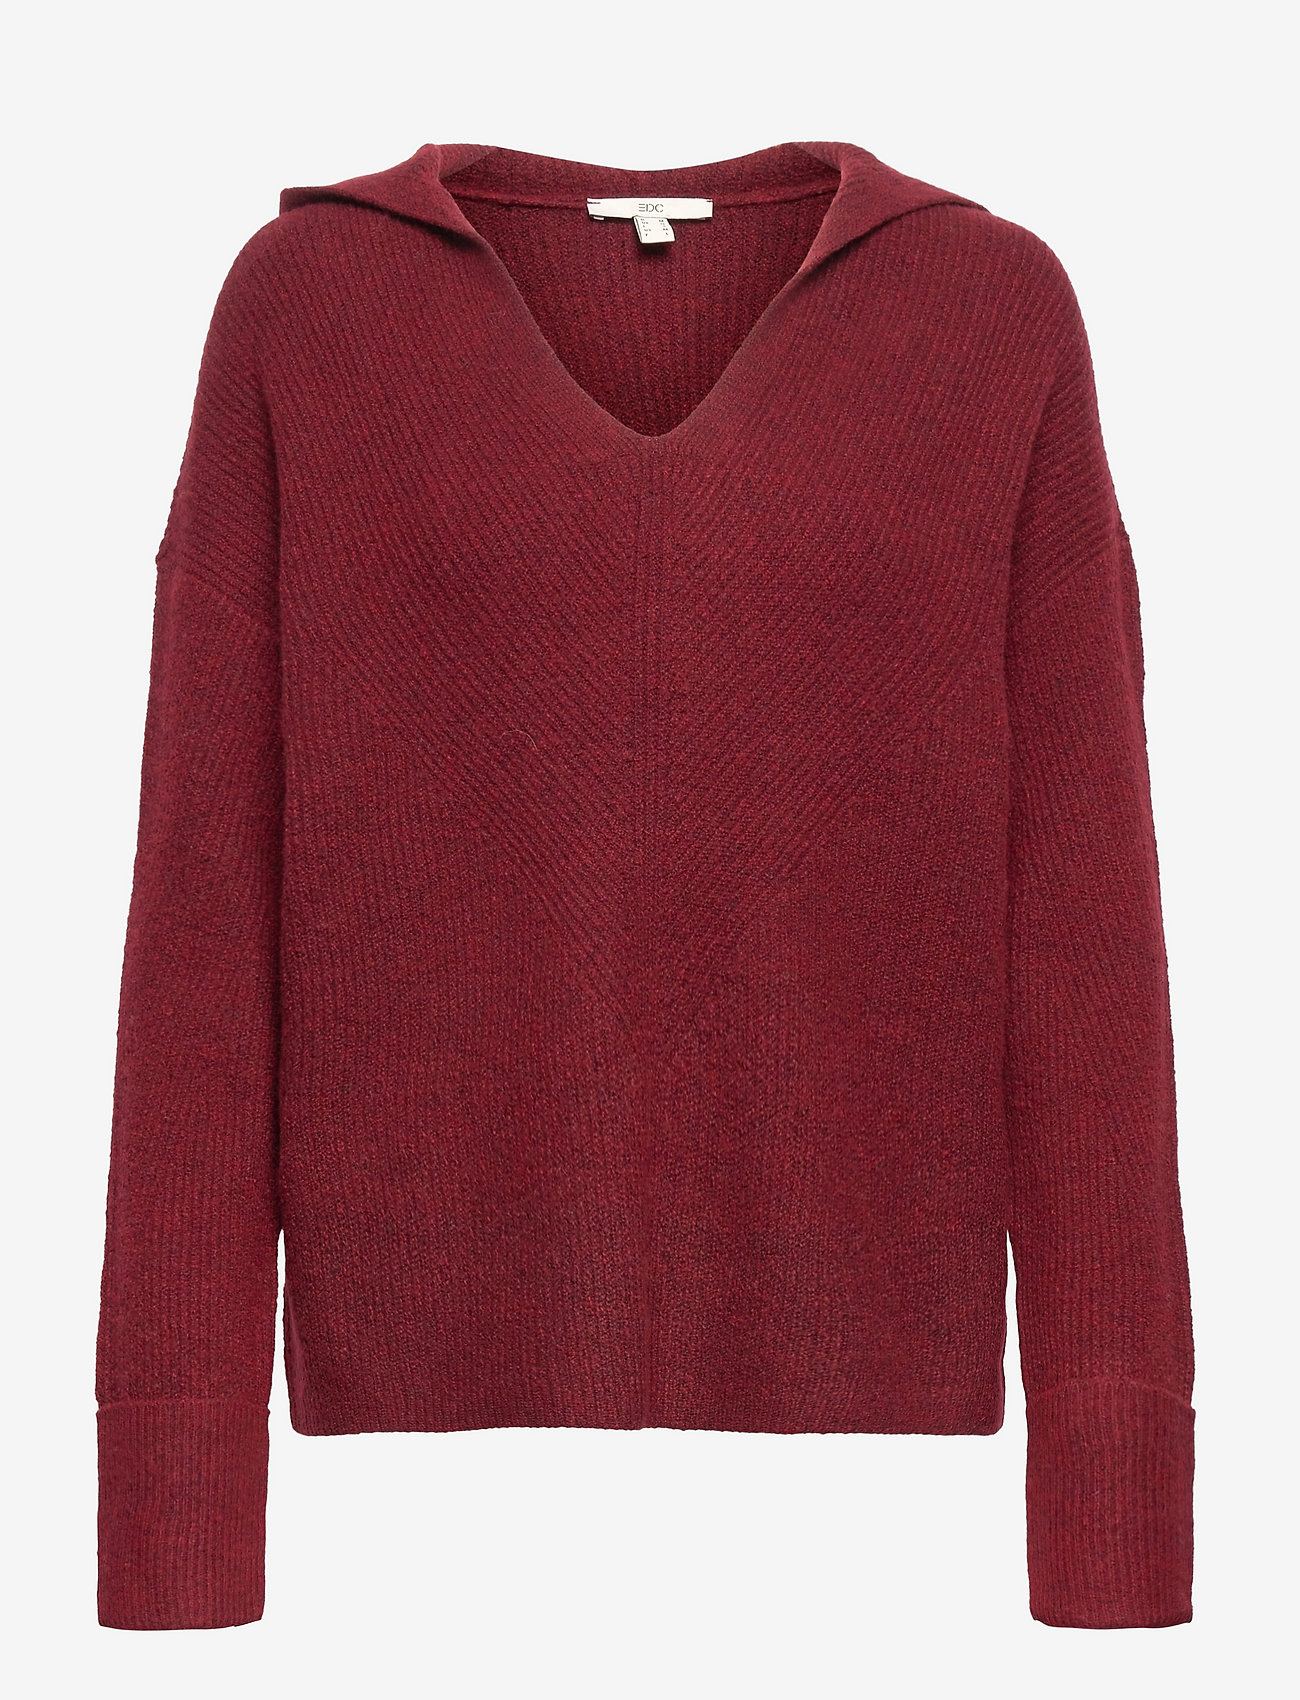 EDC by Esprit - Sweaters - swetry - dark red - 0